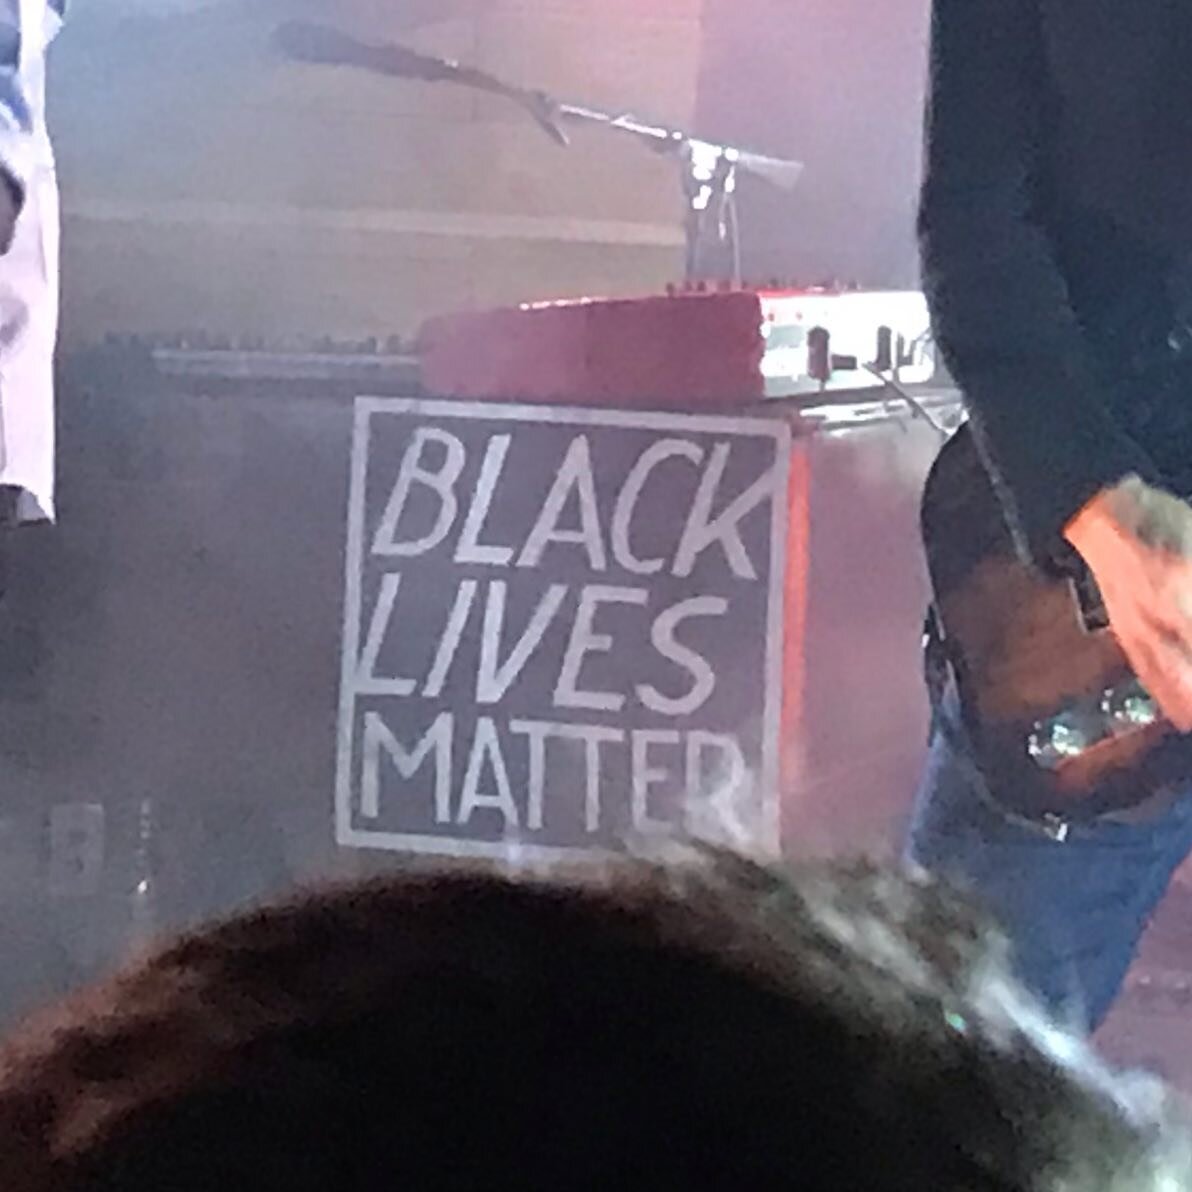 No black box anymore. But I want to be clear. So I found this picture in my phone instead. I will do everything I can to help show people that black lives matter. Donate, vote, change the narrative. Whatever I can.